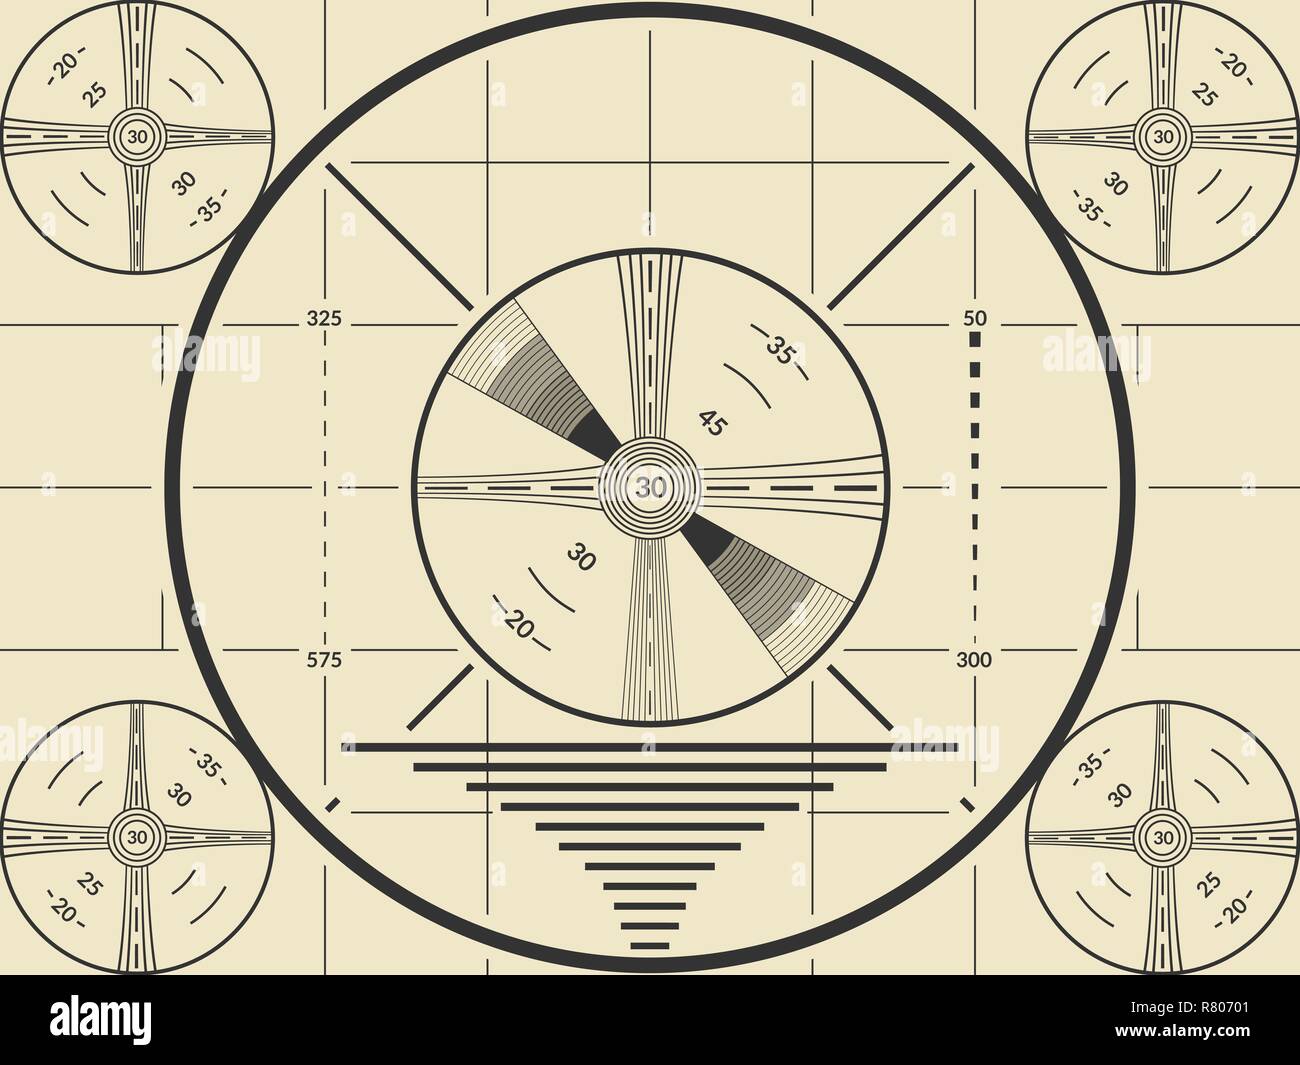 Vintage tv test screen pattern for television calibration Stock Vector